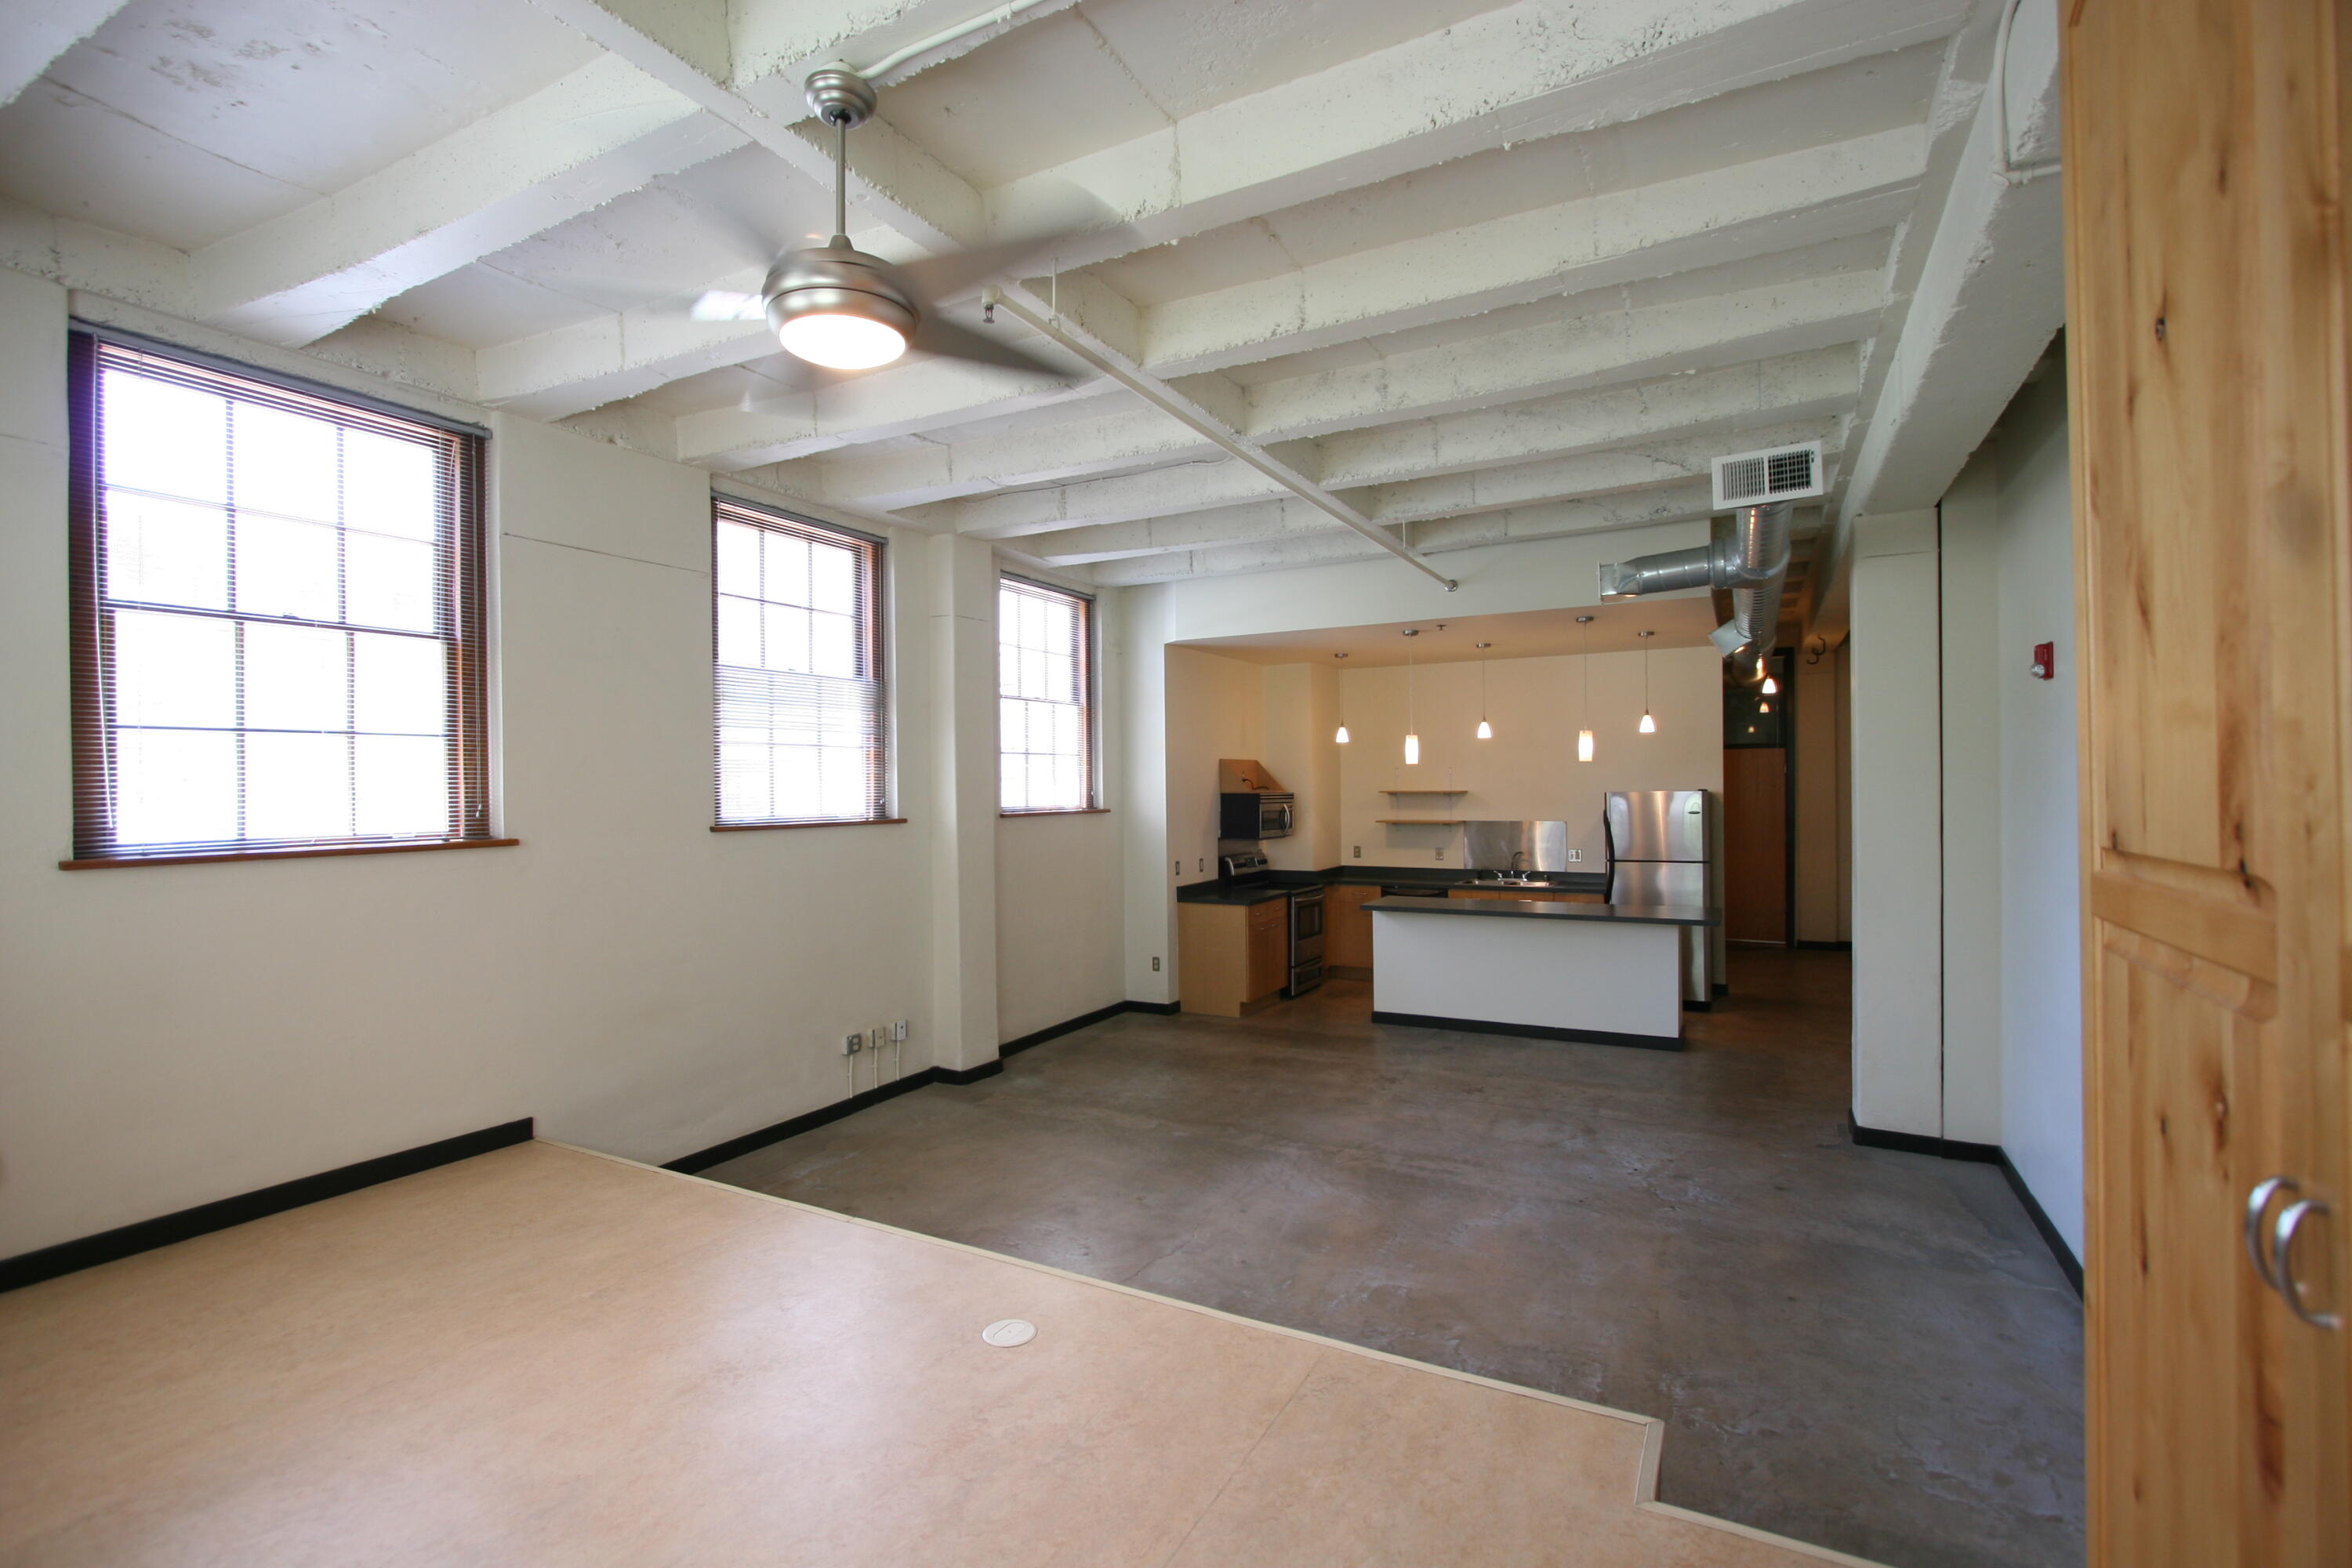 Approximately 914 sq ft, this corner-located ground-level loft in the 1939-built Gymnasium building at The Lofts at Albuquerque High features  2 east- and 3 south-facing operable windows, island kitchen with stainless steel appliances, concrete floors, concrete ceiling, full bath, and washer/dryer. Laundry/exercise facility/elevator in building. Access to beautifully landscaped secure courtyard with grill, fountains, and seating/umbrellas. Secure parking available in City-owned garage at 100 Arno for $40/month; free on-street parking. Condo Association allows dogs/cats/birds; no weight limit on dog; limit 2 pets. No AirBnBs allowed.